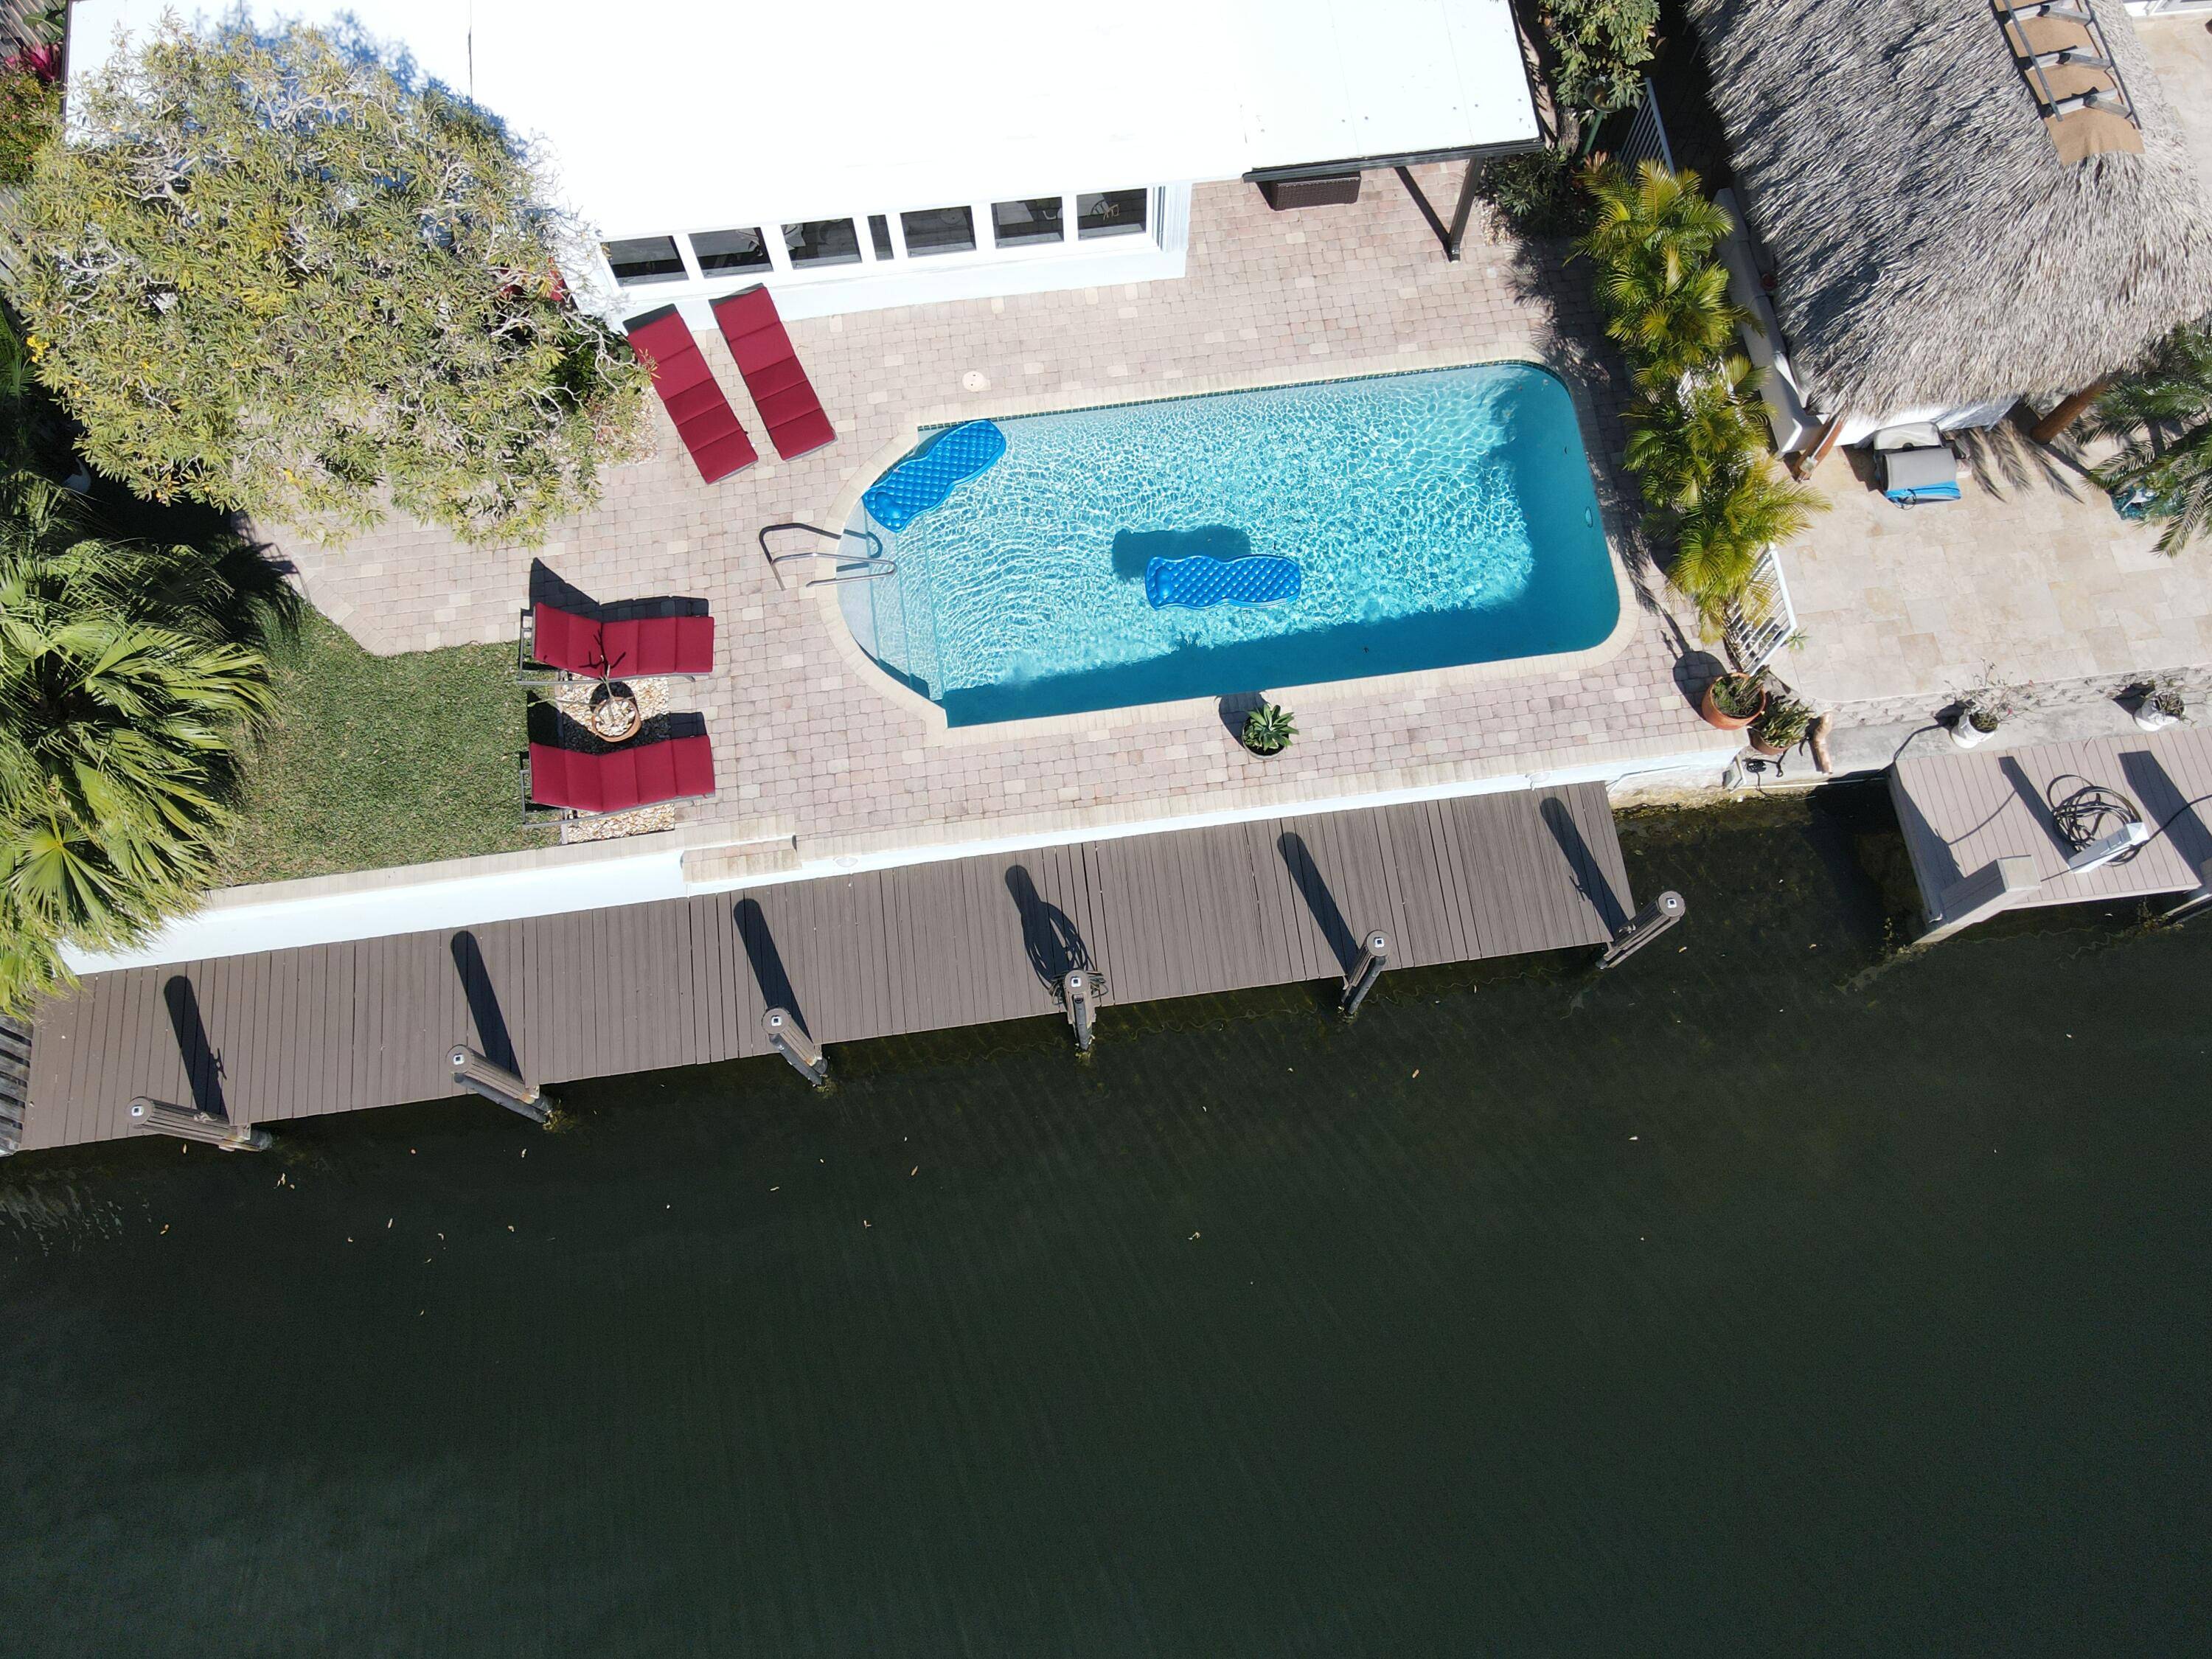 This is an exquisite, furnished home situated on a canal with no fixed bridges in Pompano Beach Isles.